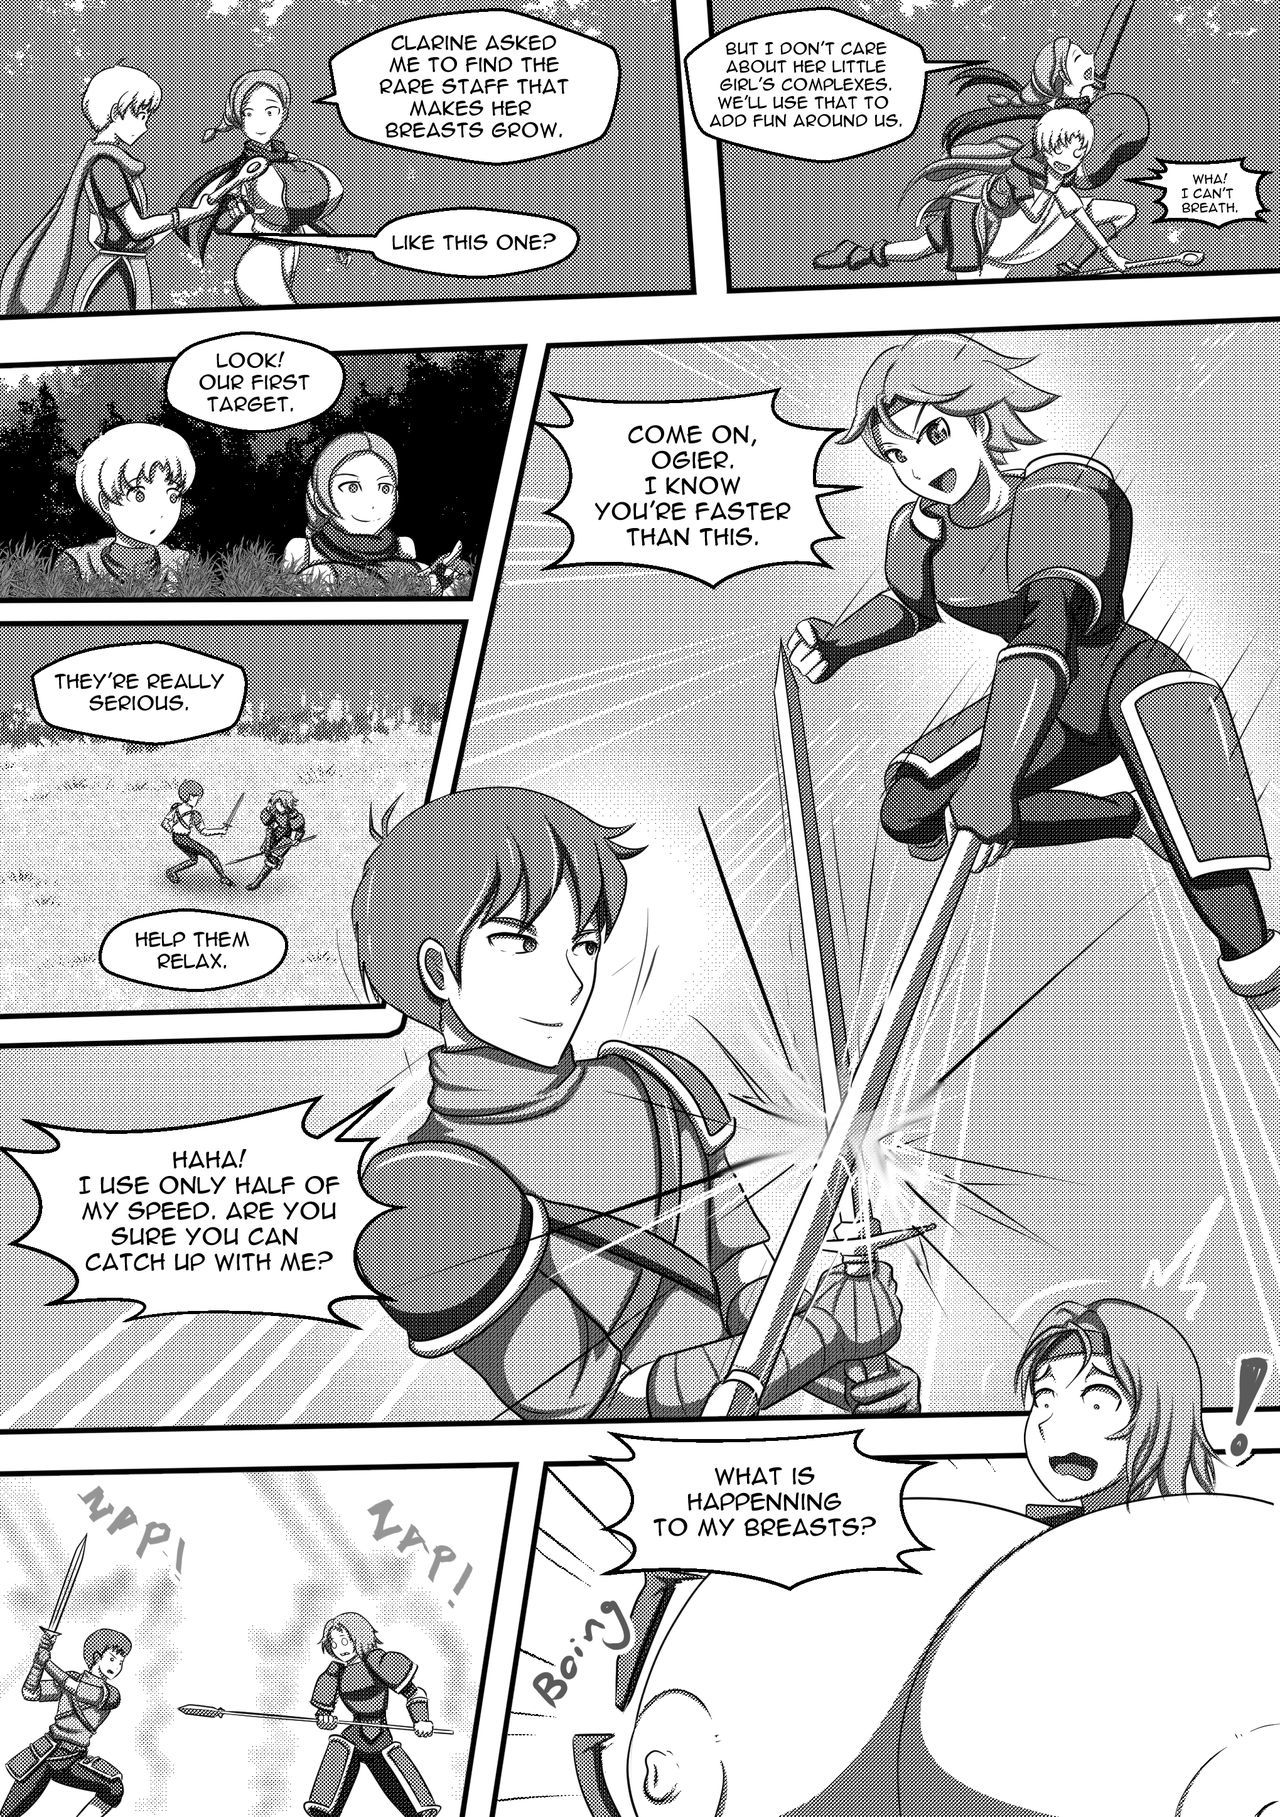 [EscapefromExpansion] Fire Emblem: The Binding Boobs [Ongoing] 7